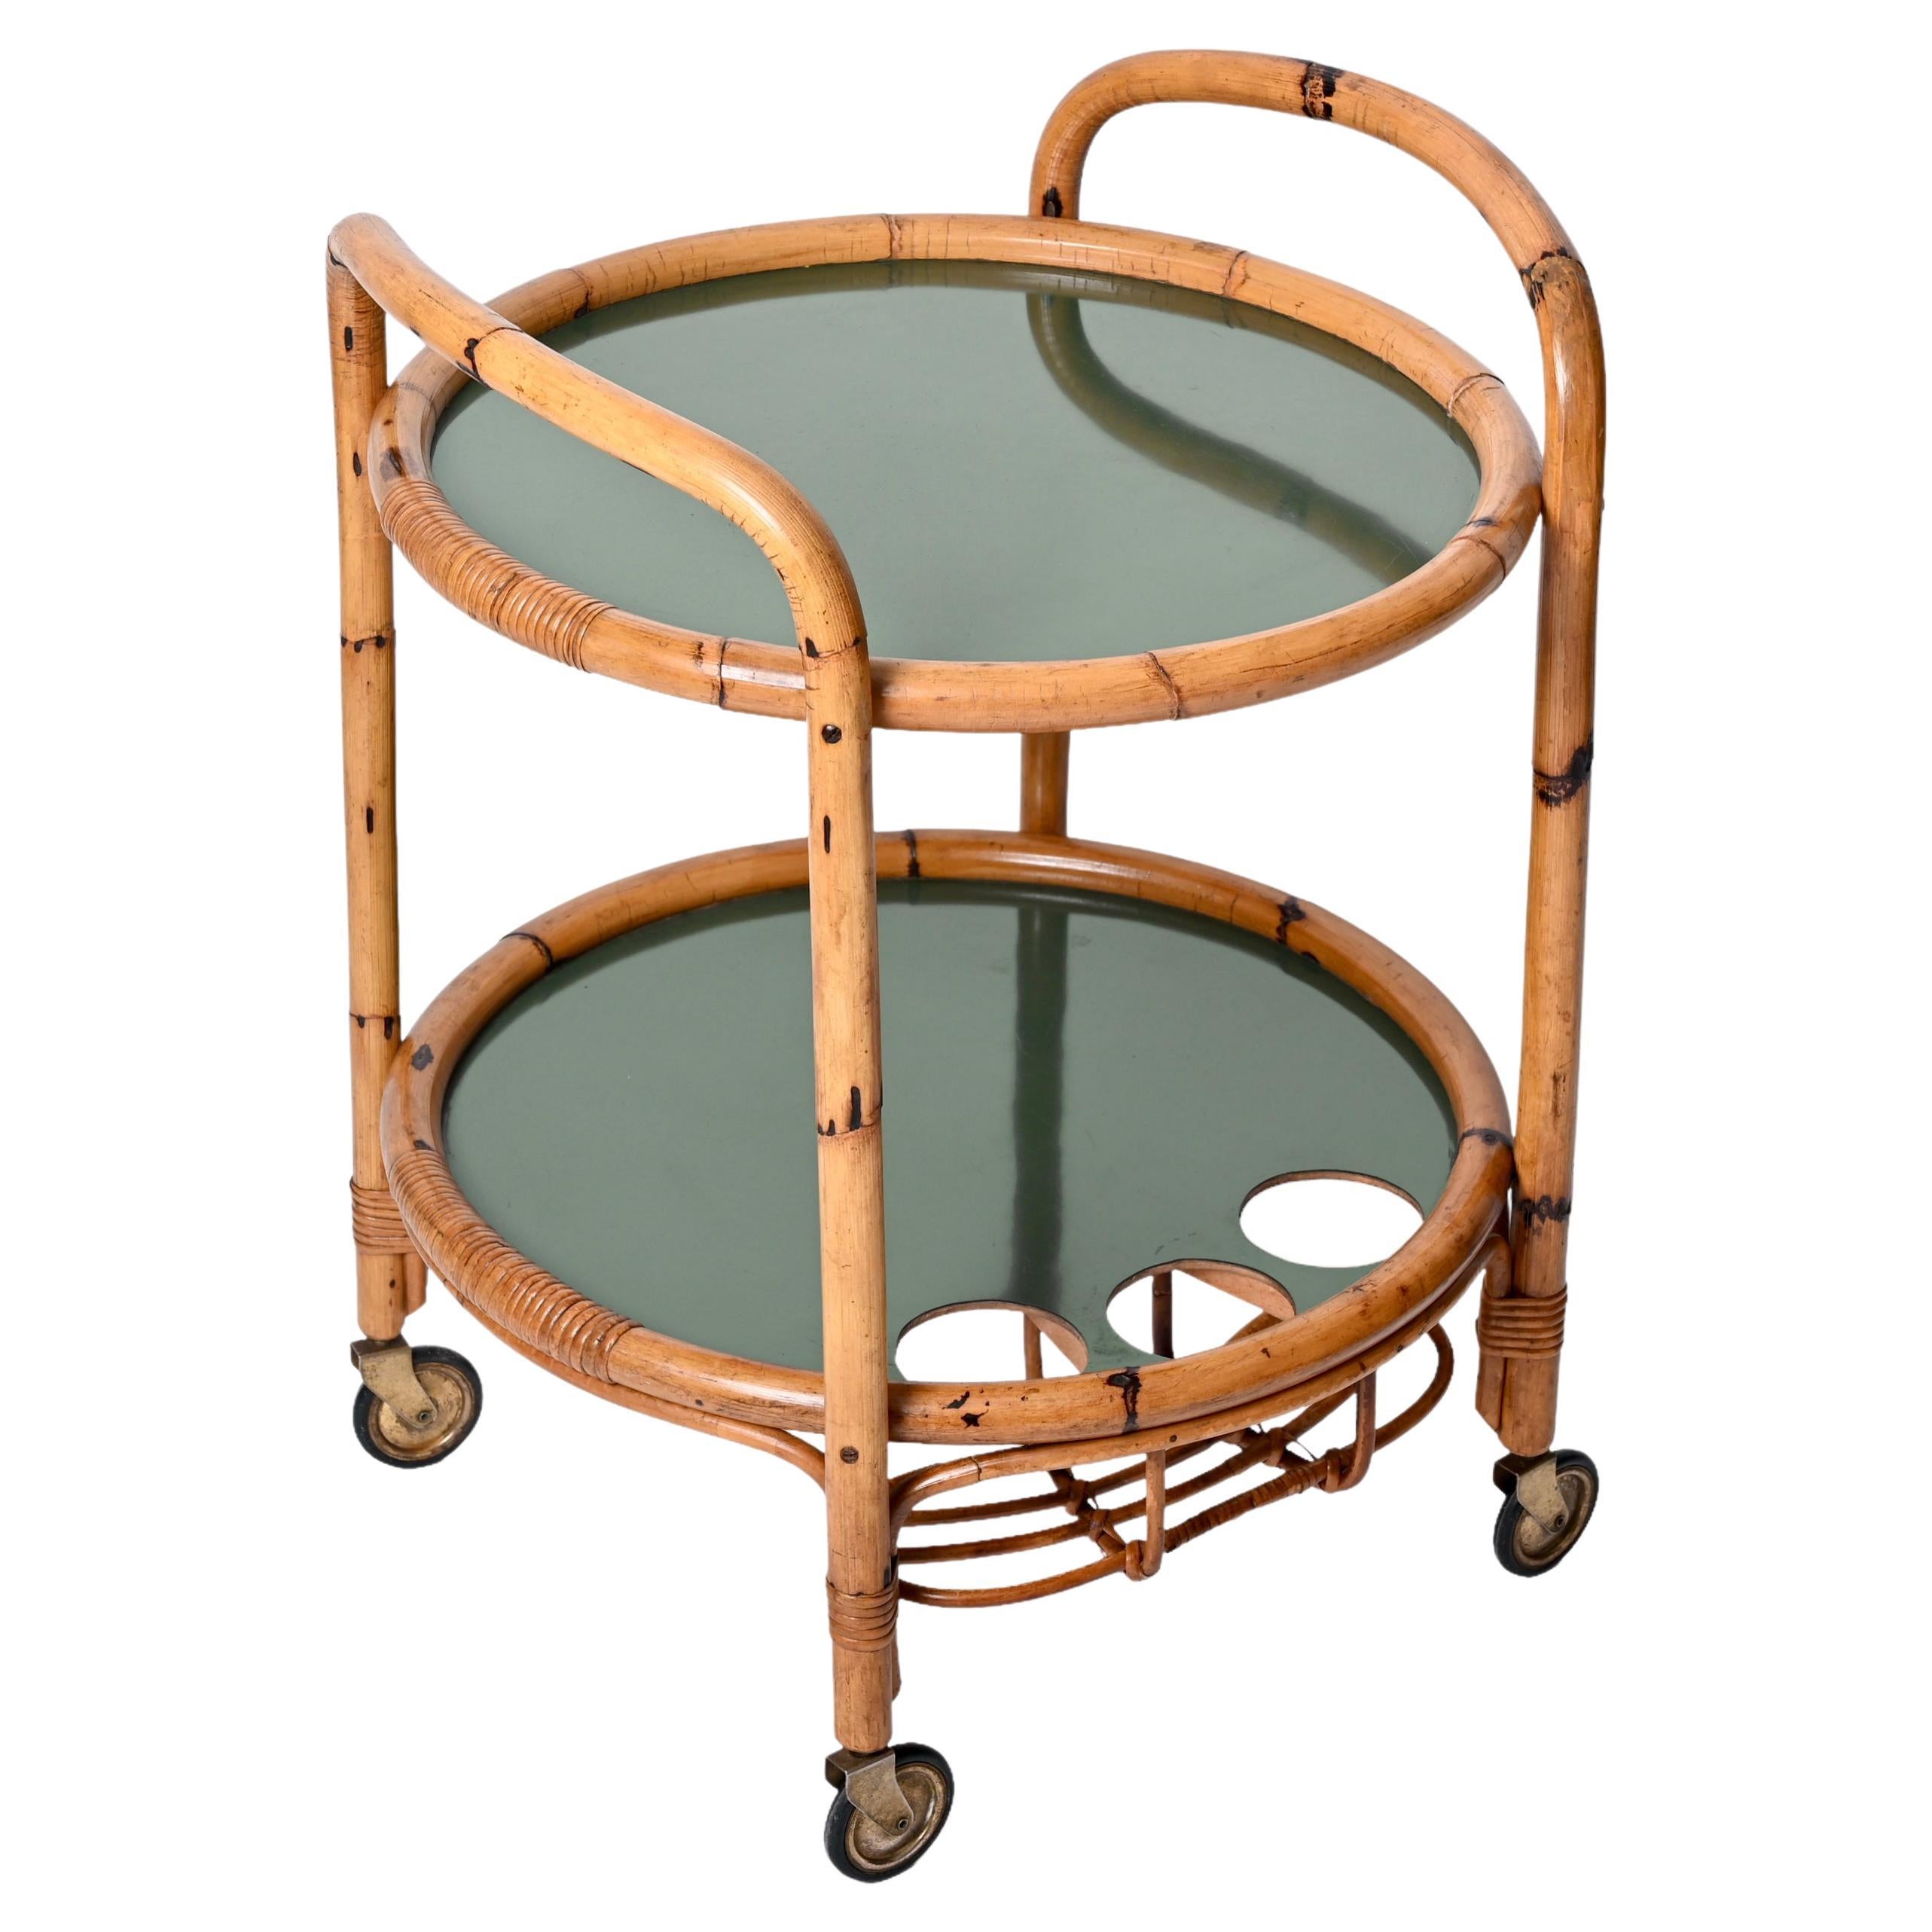 Midcentury Bar Serving Cart in Bamboo, Rattan and Green Formica, Italy, 1970s For Sale